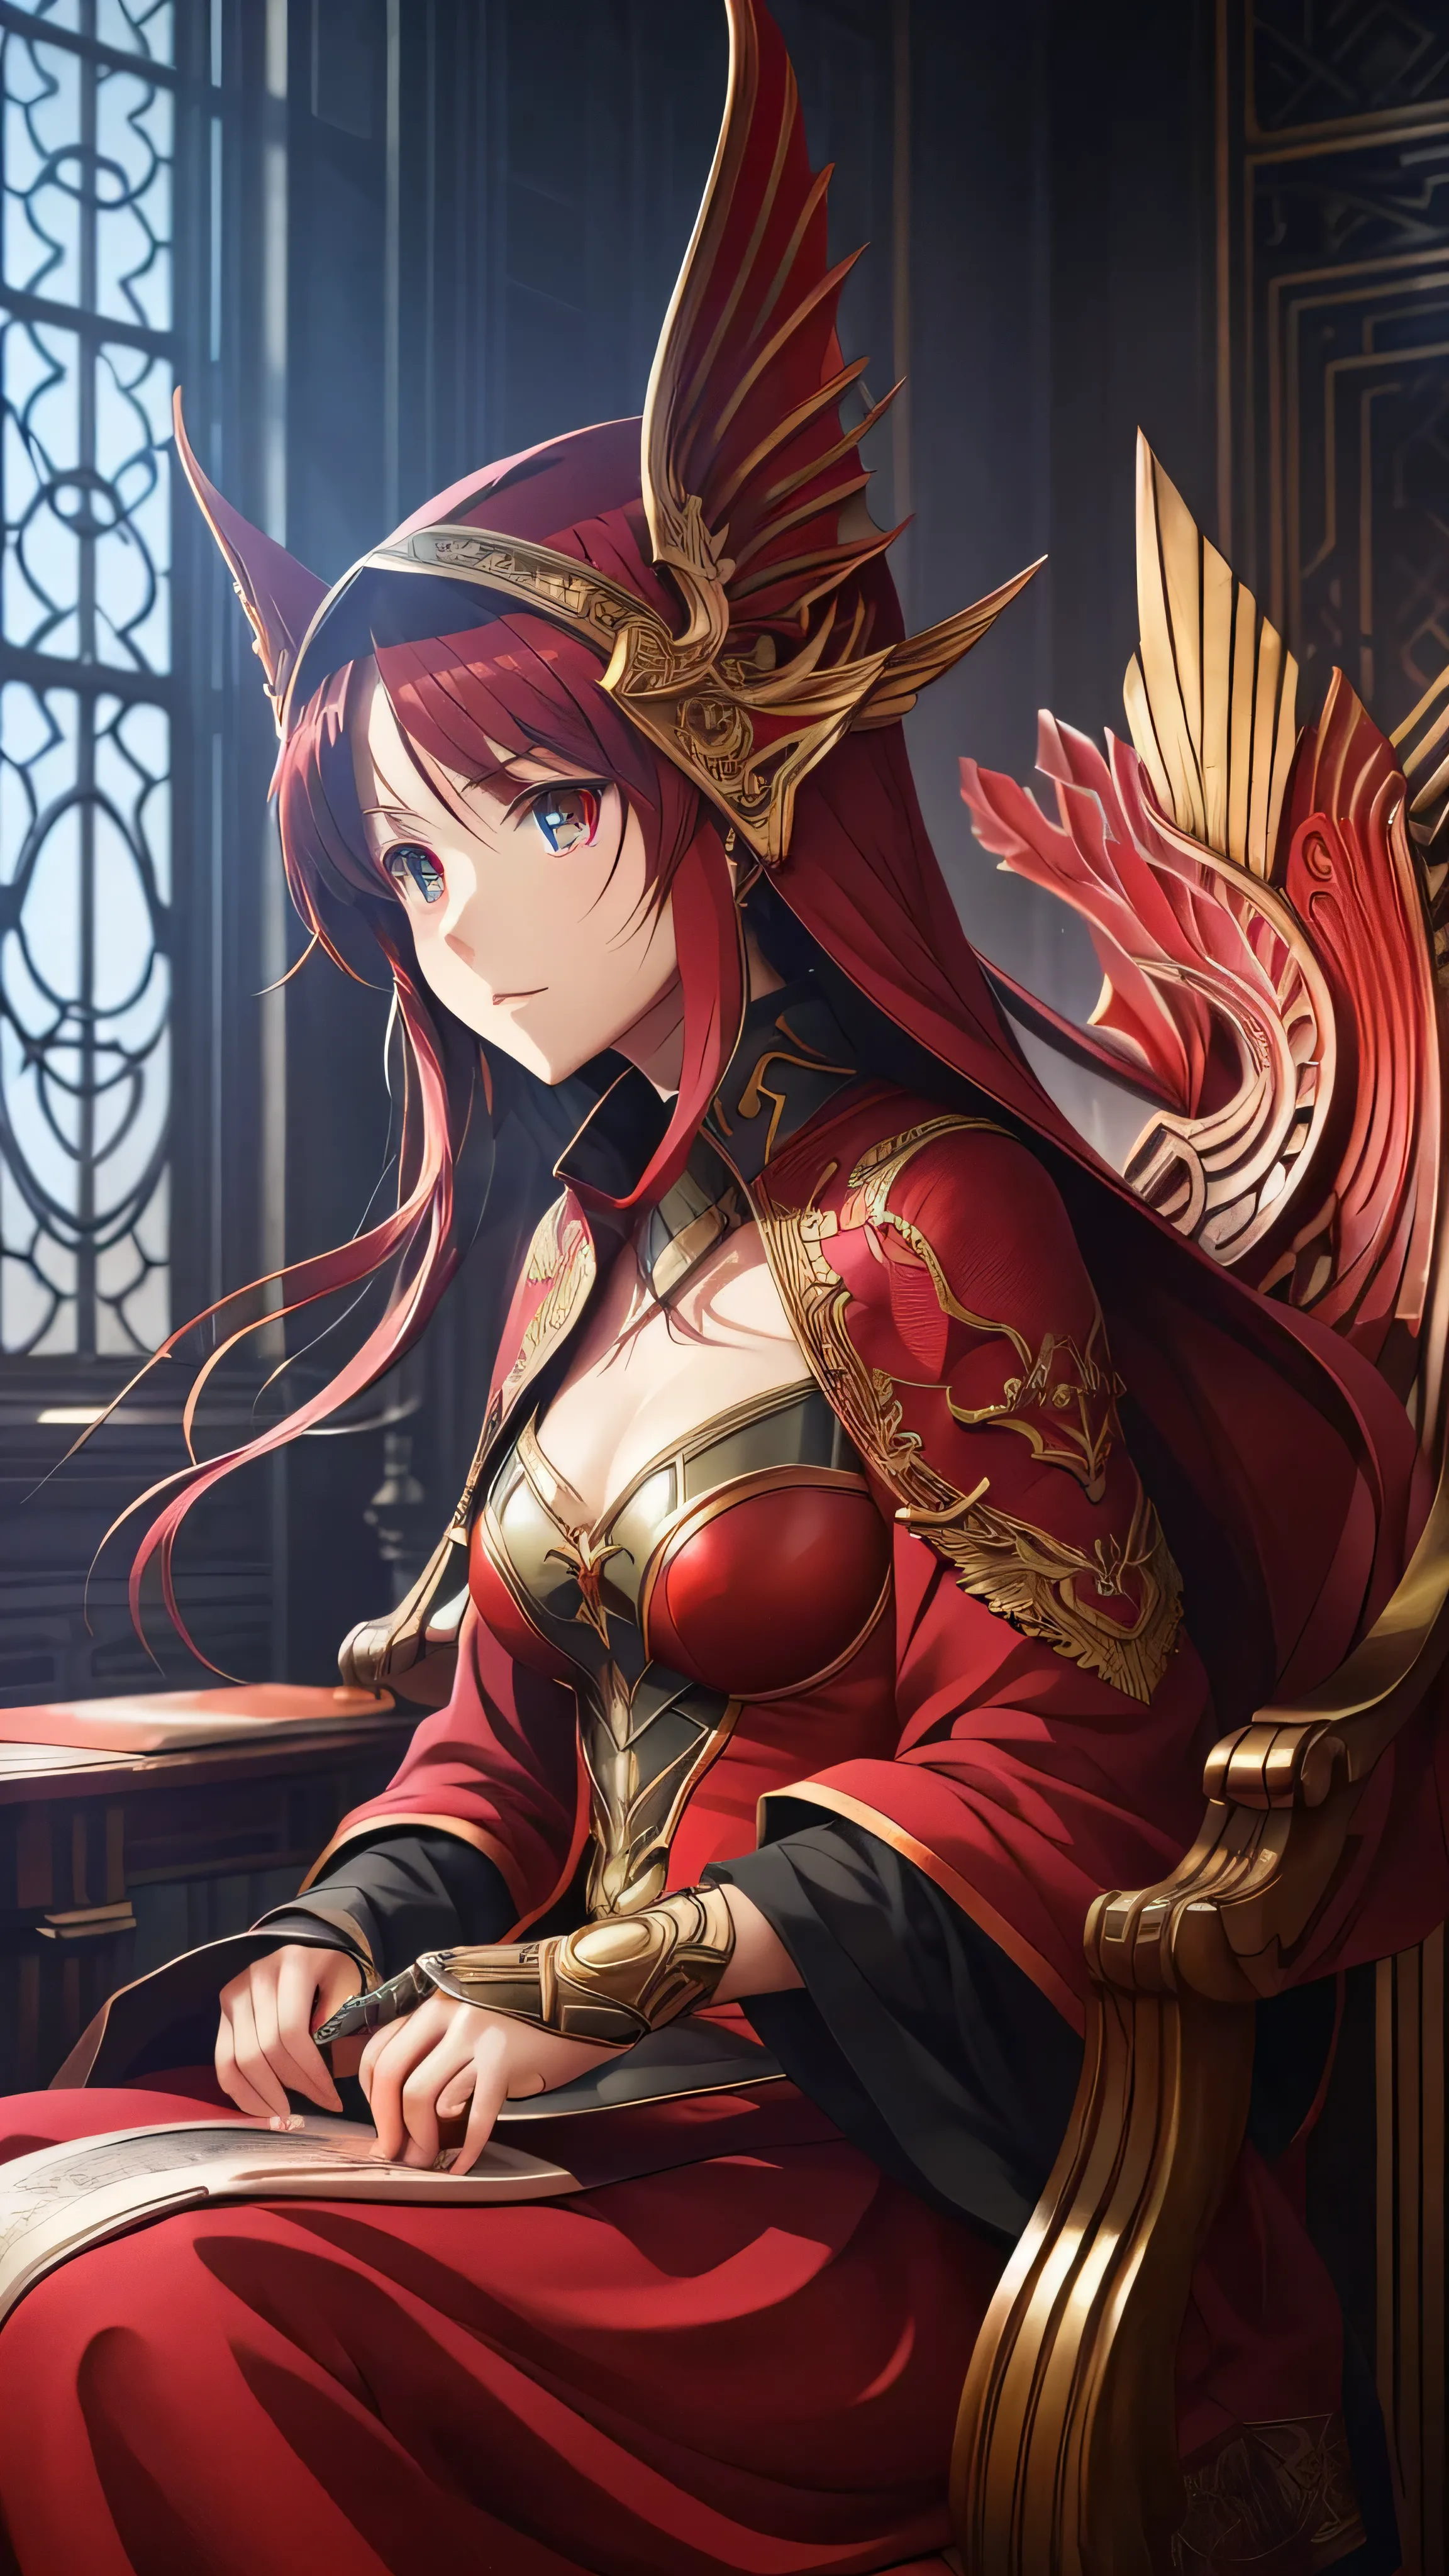 Wrapped in a captivating crimson coat、Hall々Sitting elegantly in a comfortable chair、Breathtaking CG artwork featuring majestic d...